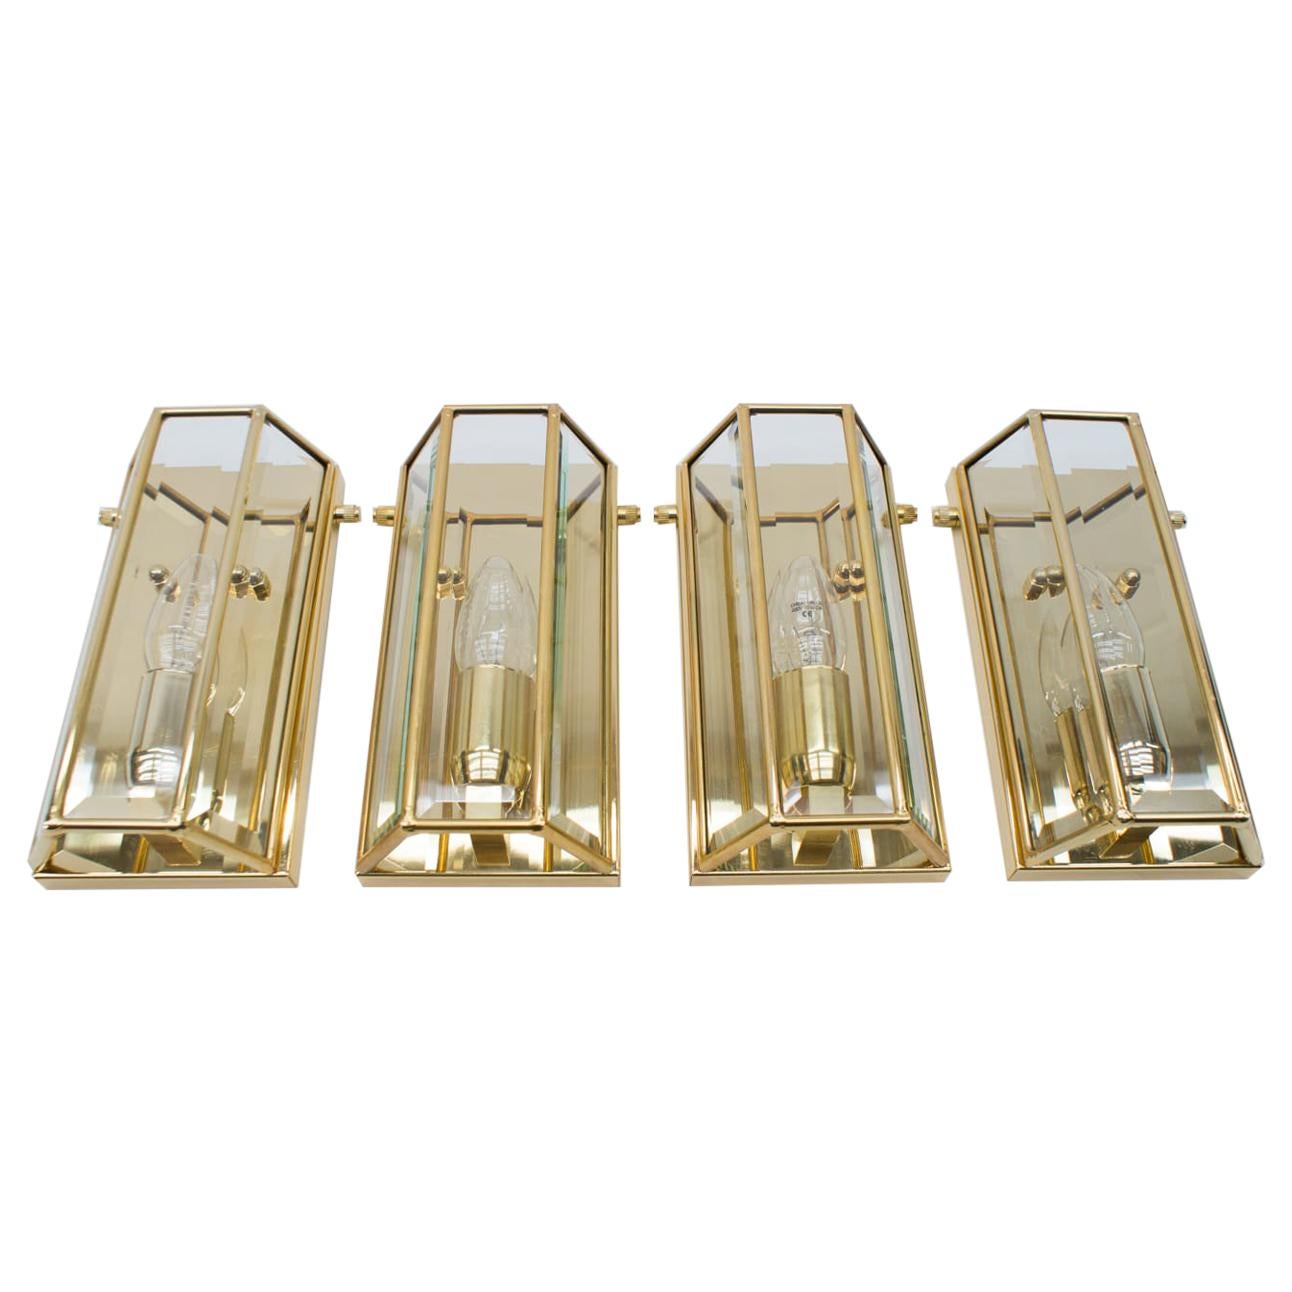 Set of 4 Elegant Midcentury Brass and Cut Glass Wall Lamps by W. Müller Munich For Sale